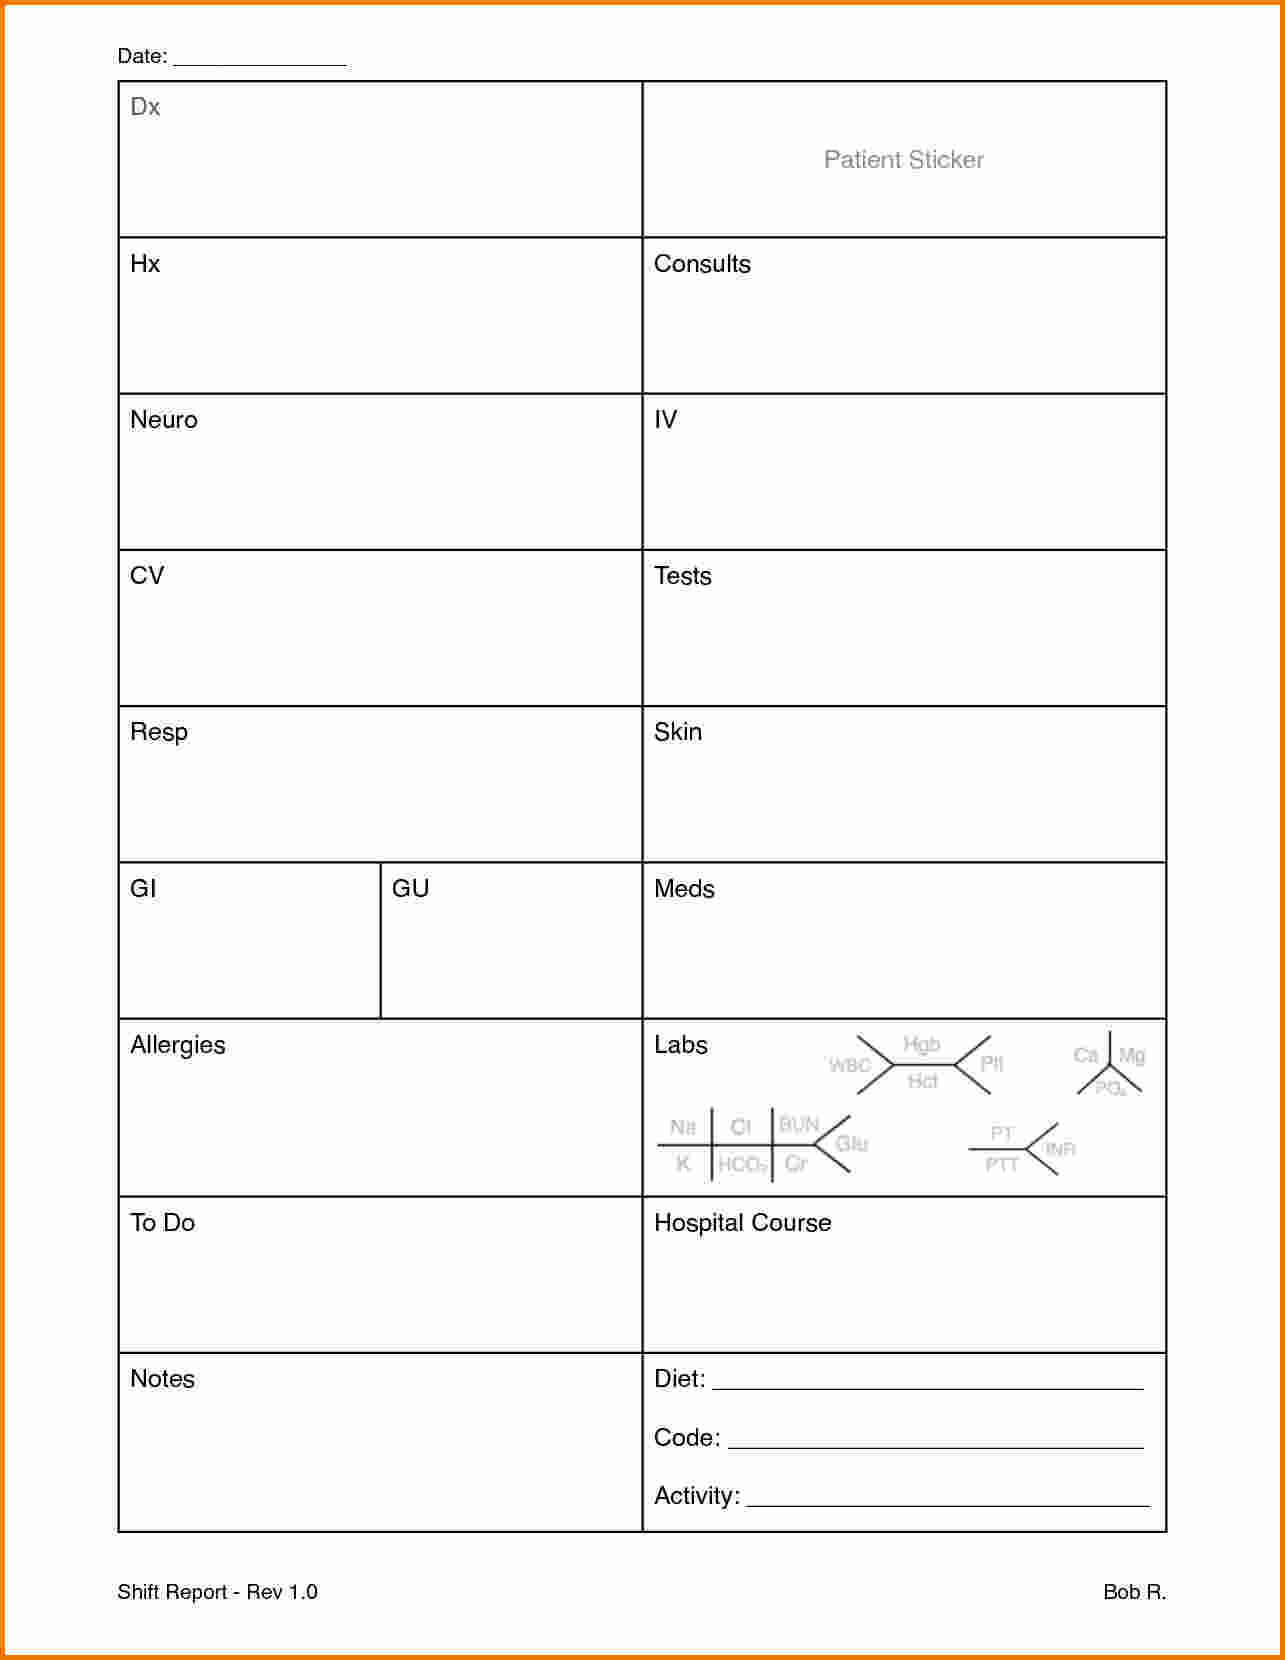 Printable Nurse Report Sheets That Are Critical | Darryl's Blog With Regard To Charge Nurse Report Sheet Template